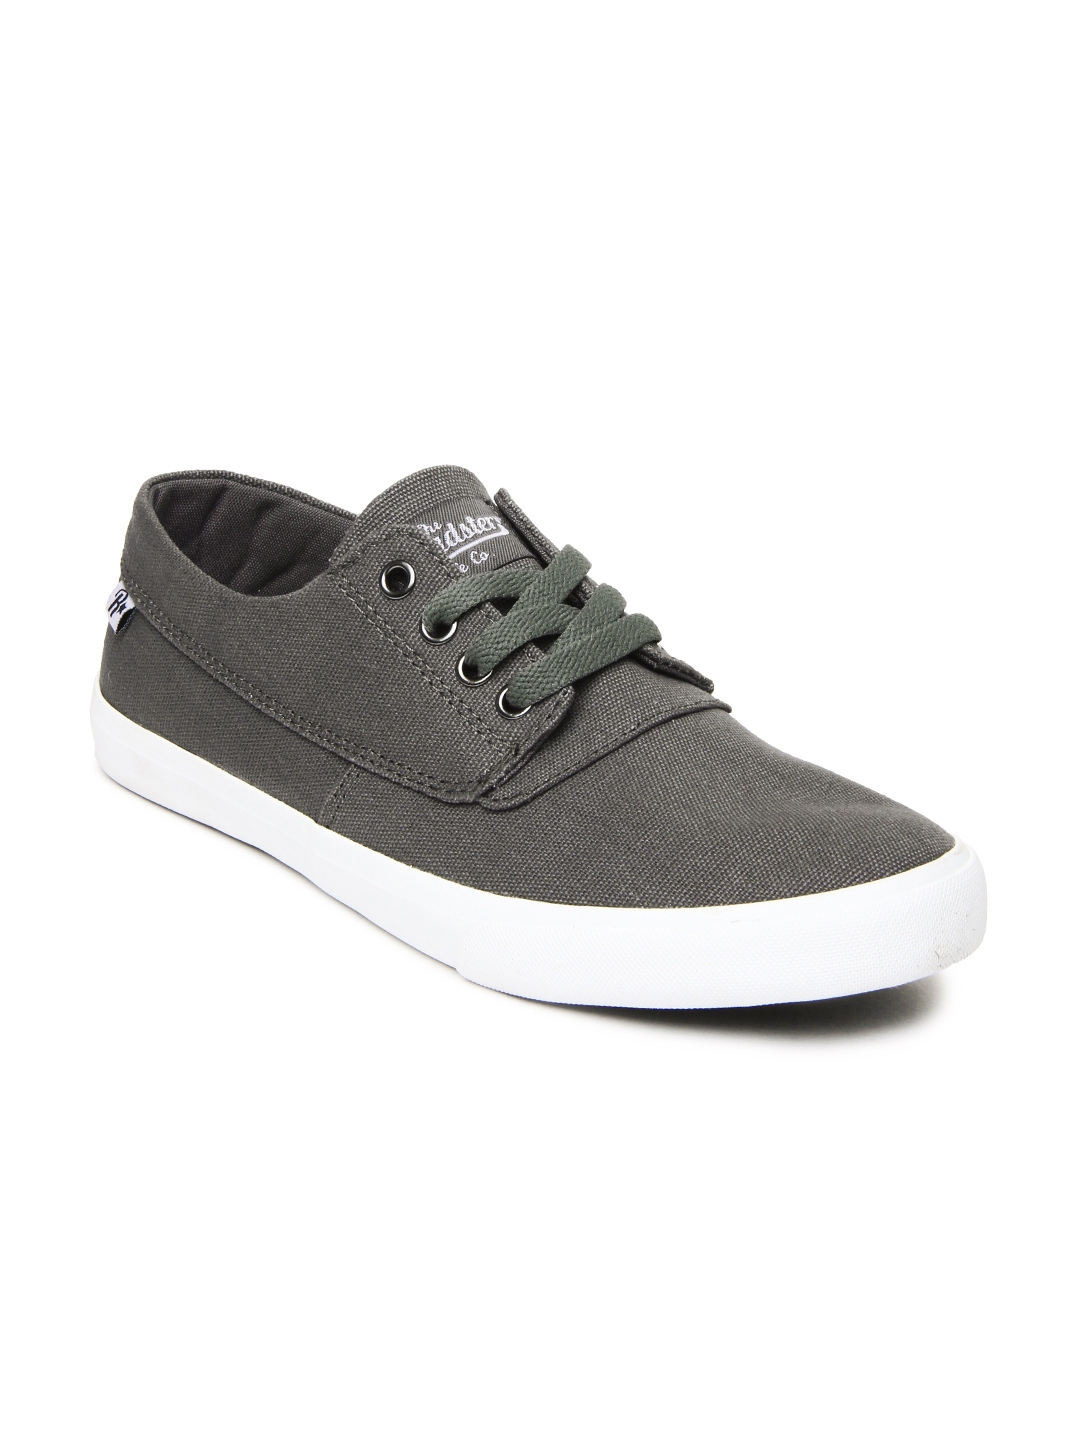 Buy Roadster Men Grey Casual Shoes - Casual Shoes for Men 316697 | Myntra